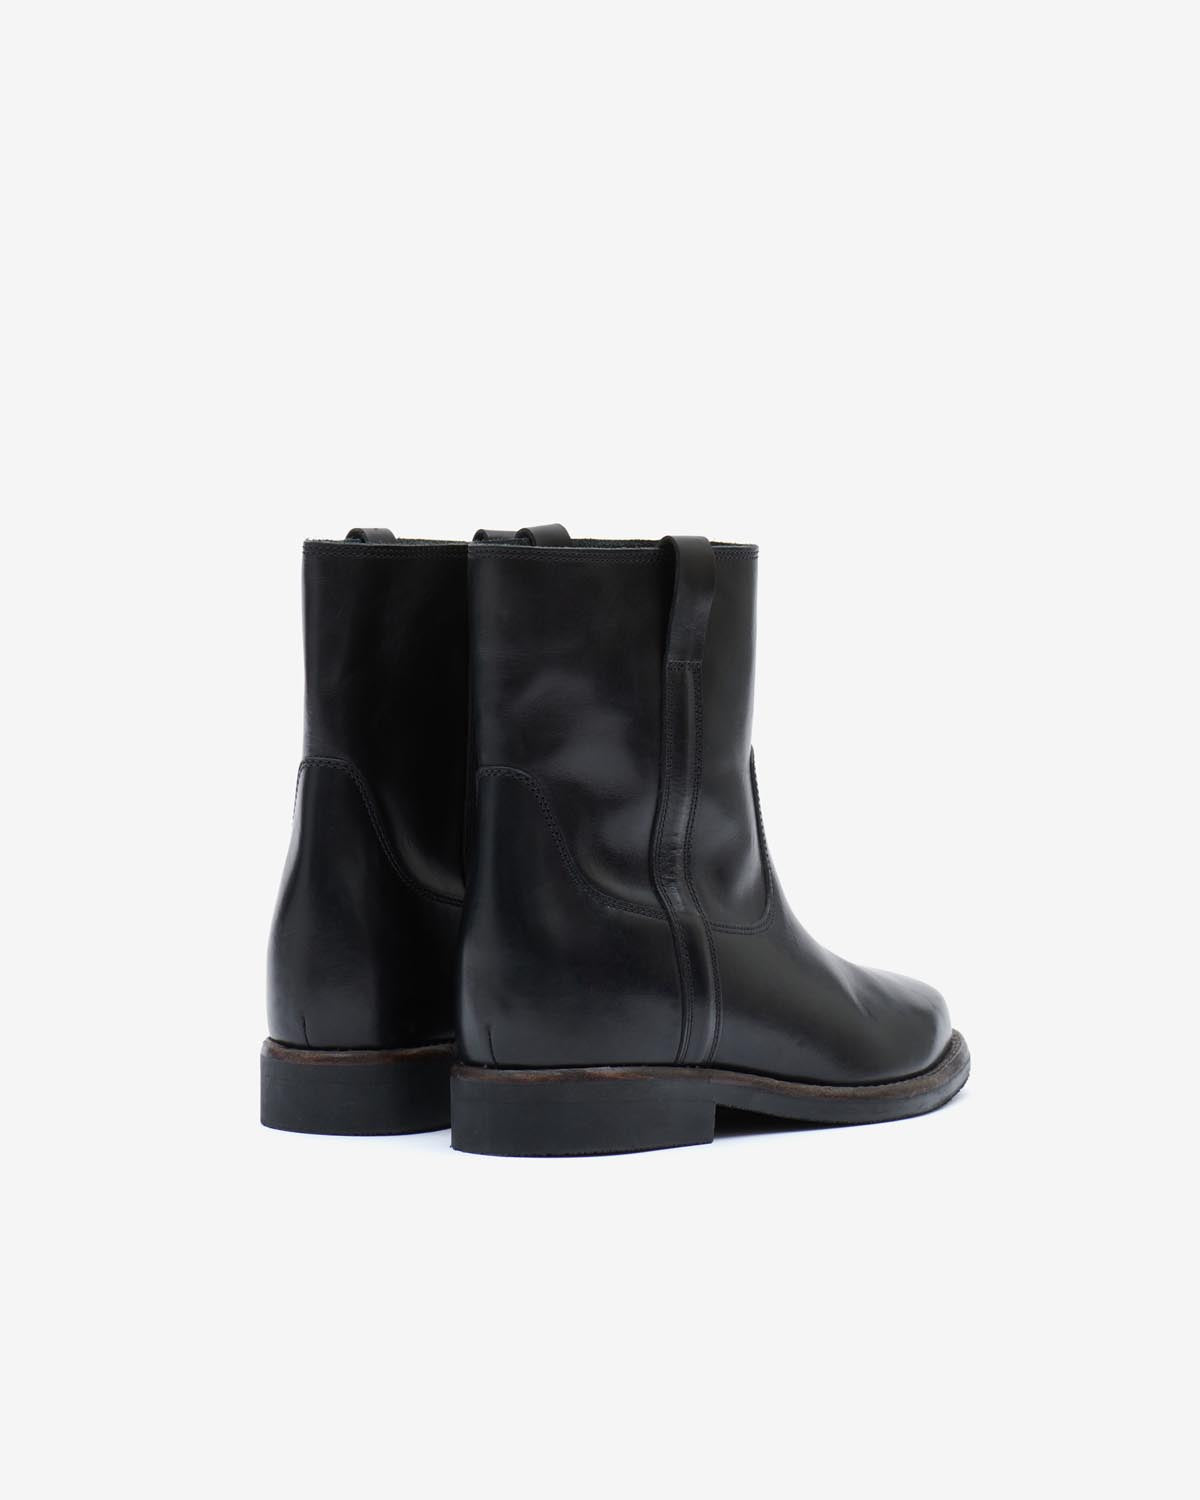 Boots susee Woman Noir 2